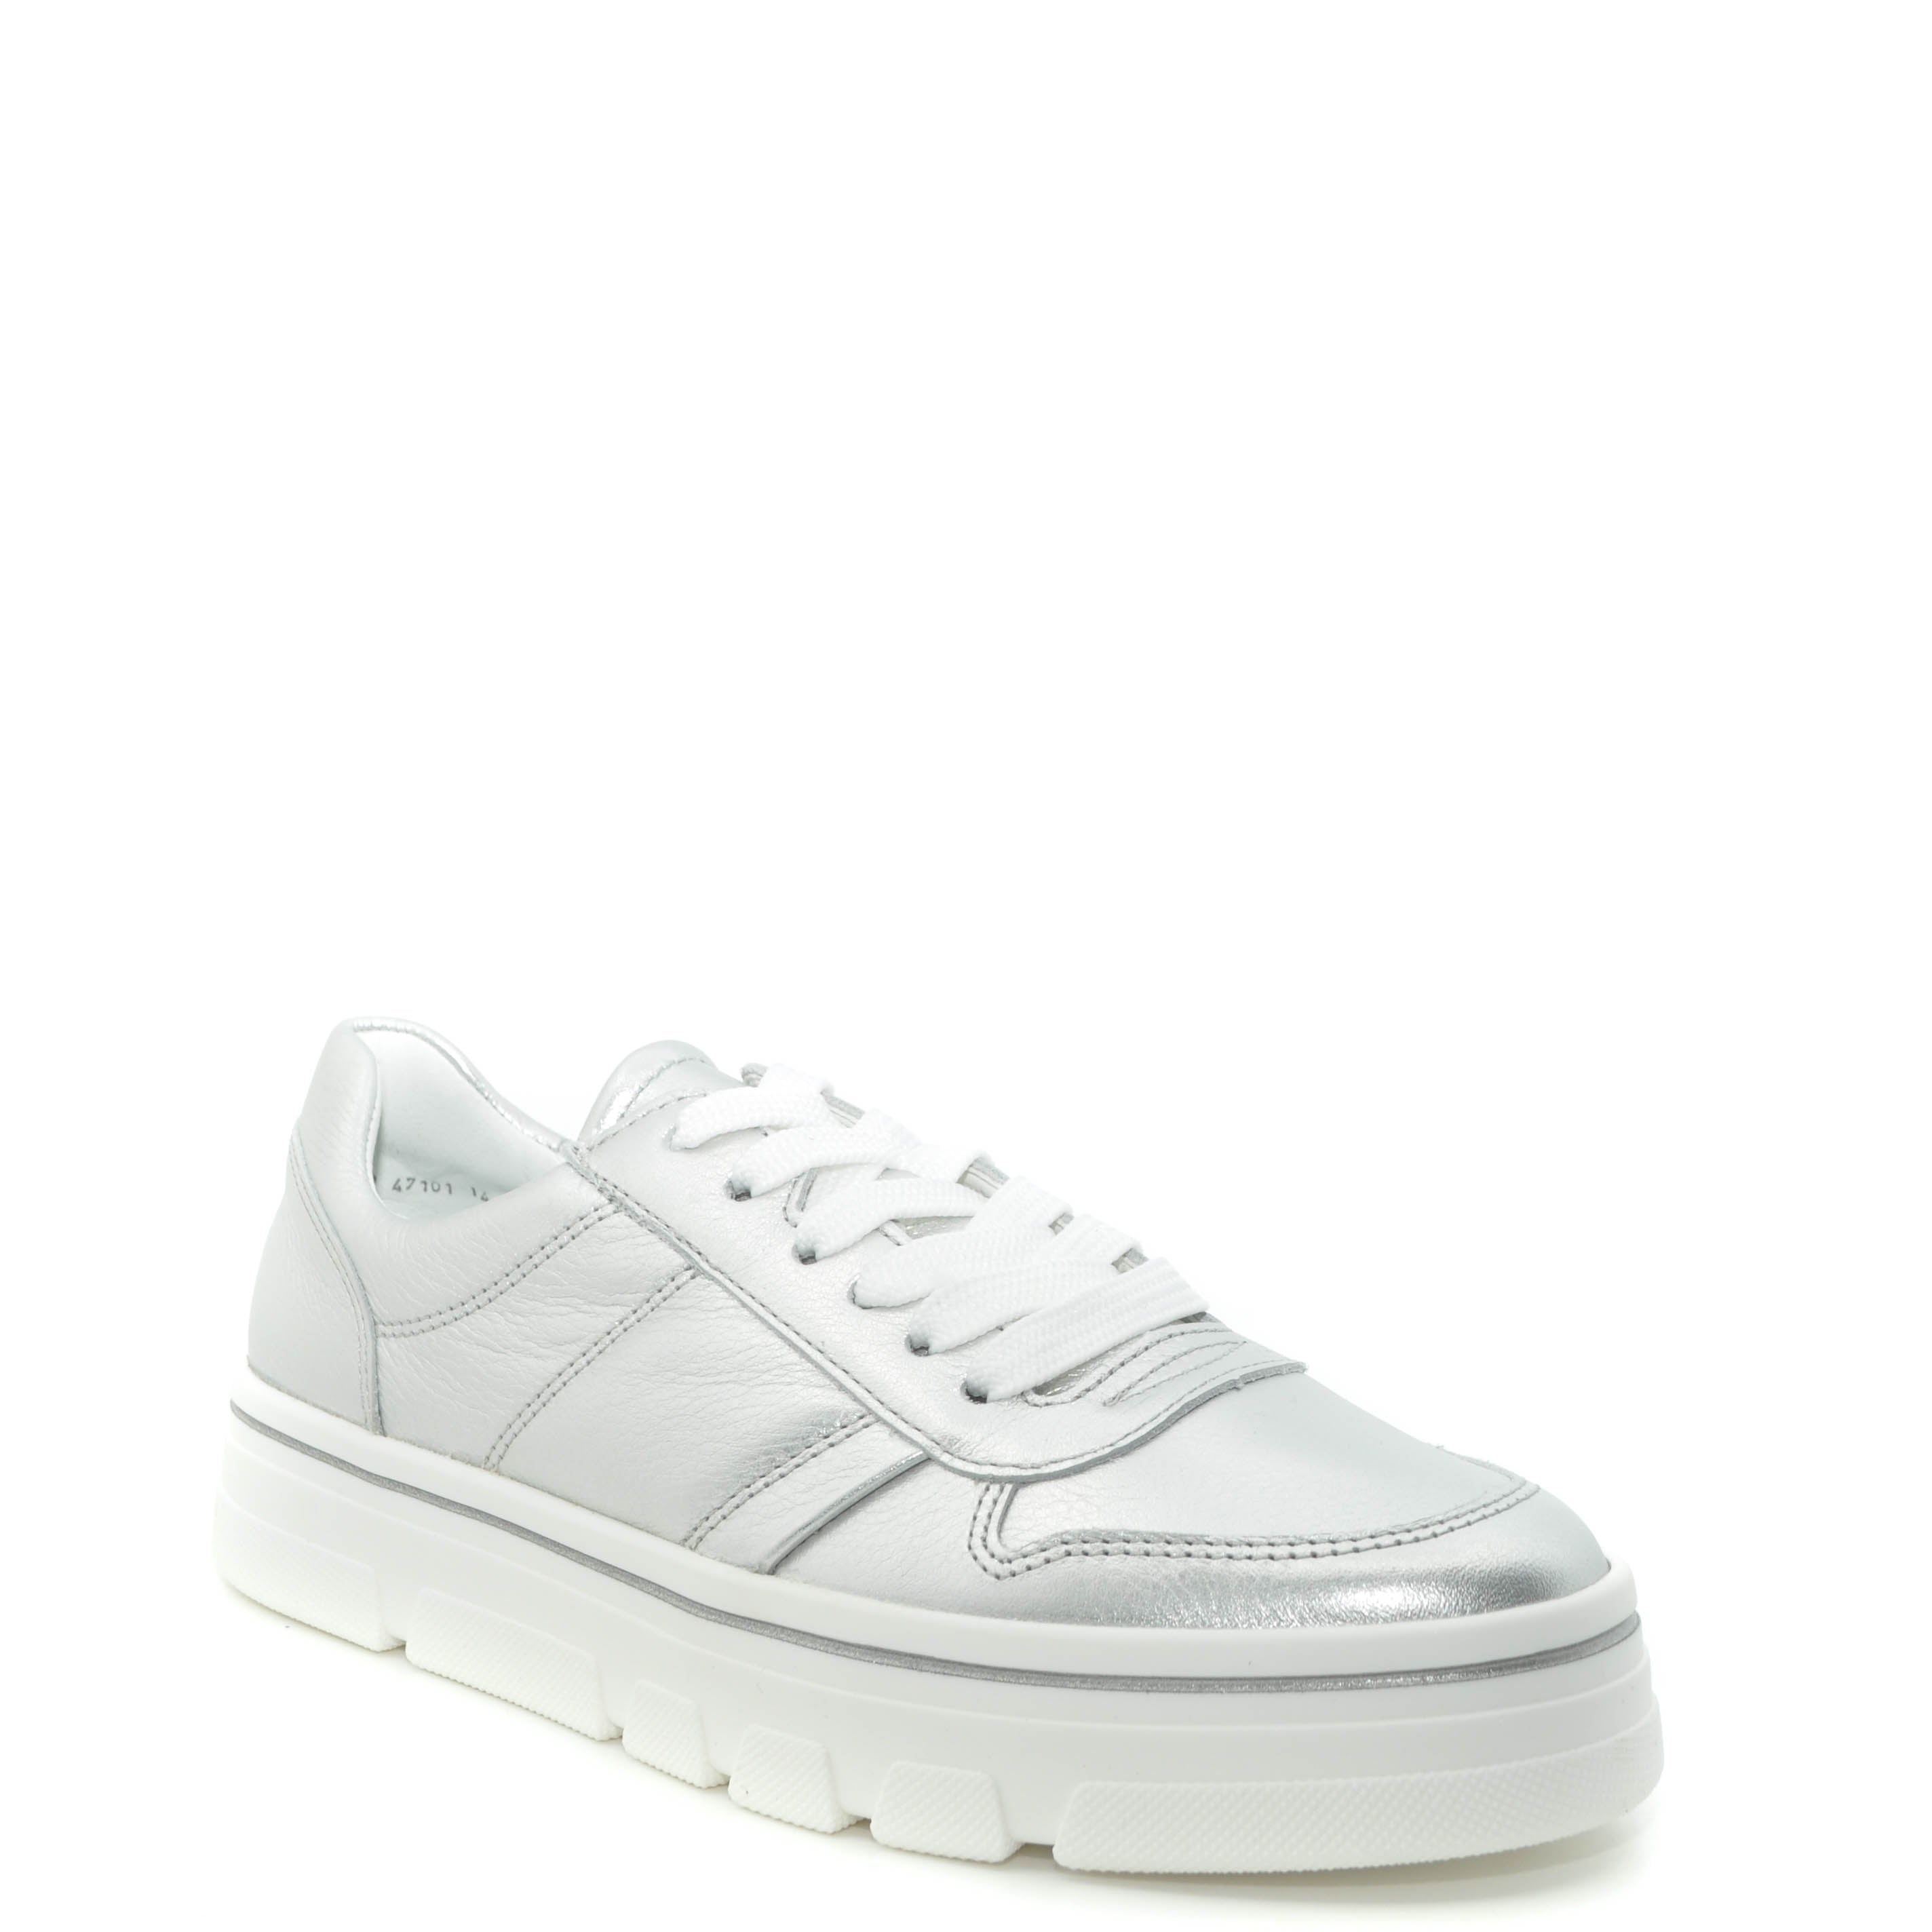 ARA trainers online | womens shoes | ladies leather shoes